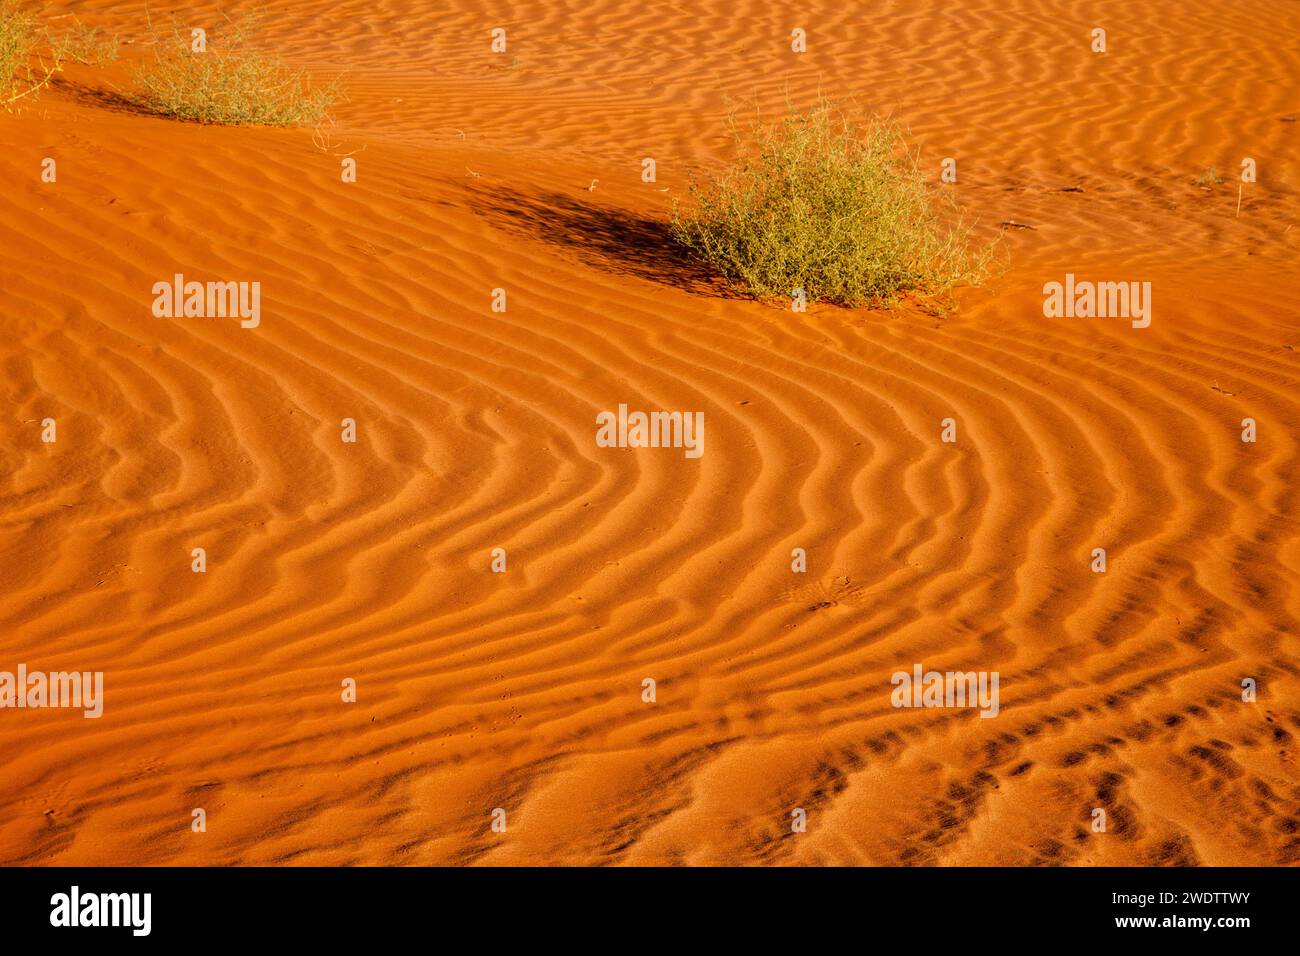 A tumbleweed in the rippled sand dunes in the Monument Valley Navajo Tribal Park in Arizona. Stock Photo